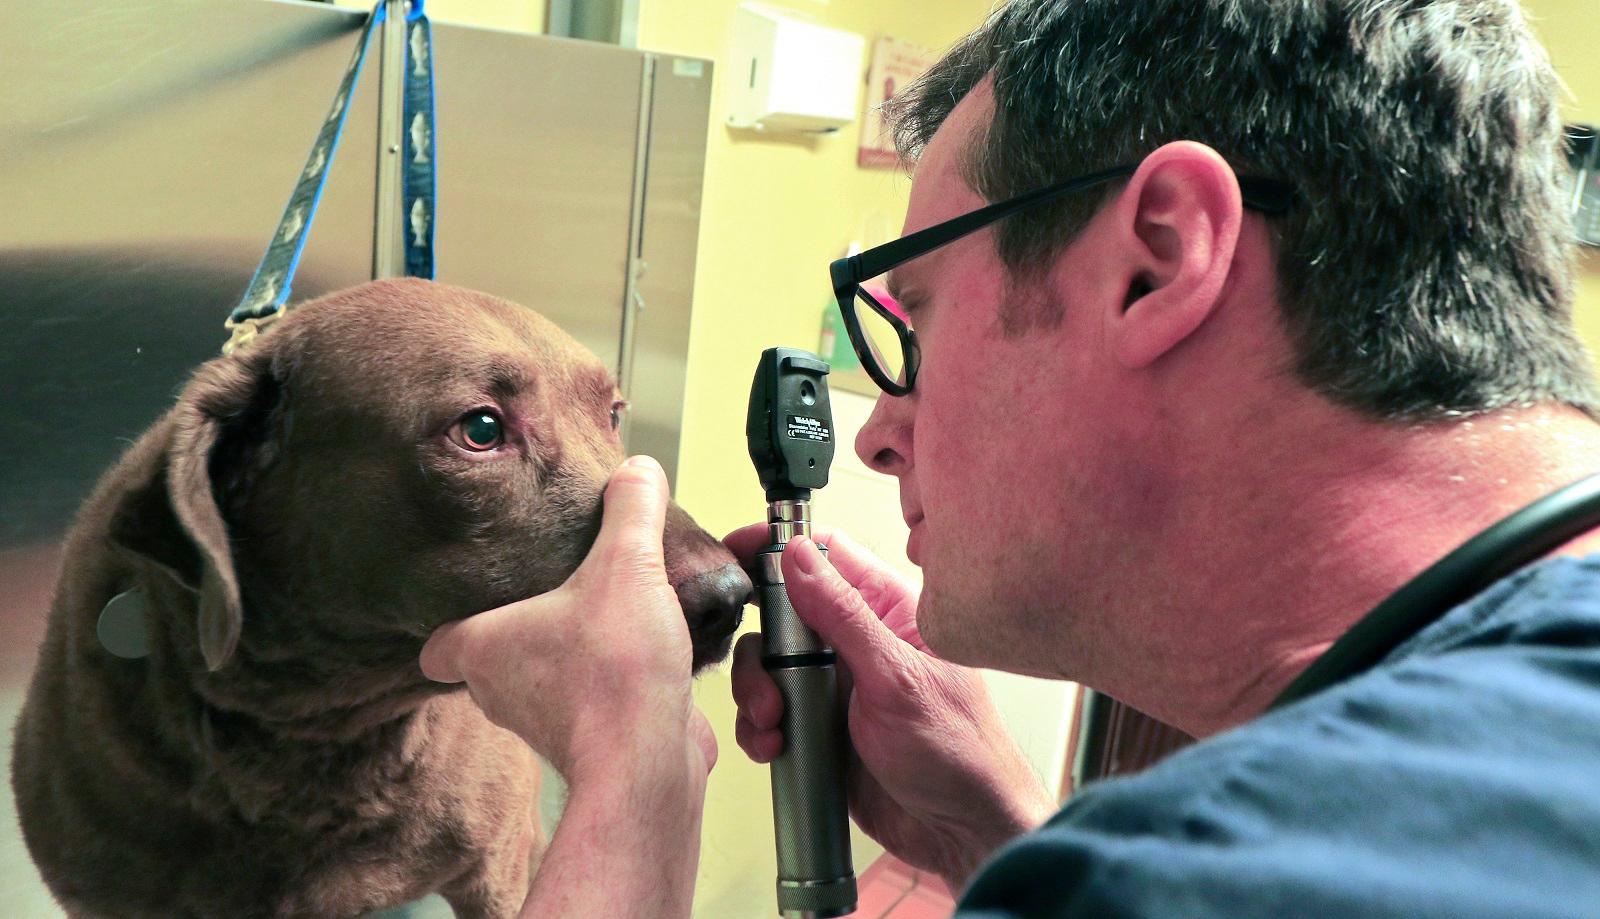 Your pet’s eyes are as delicate as they are beautiful! Dr. Kenneth Palmer, DVM, uses an ophthalmoscope to carefully examine this sweet dog’s eyes.